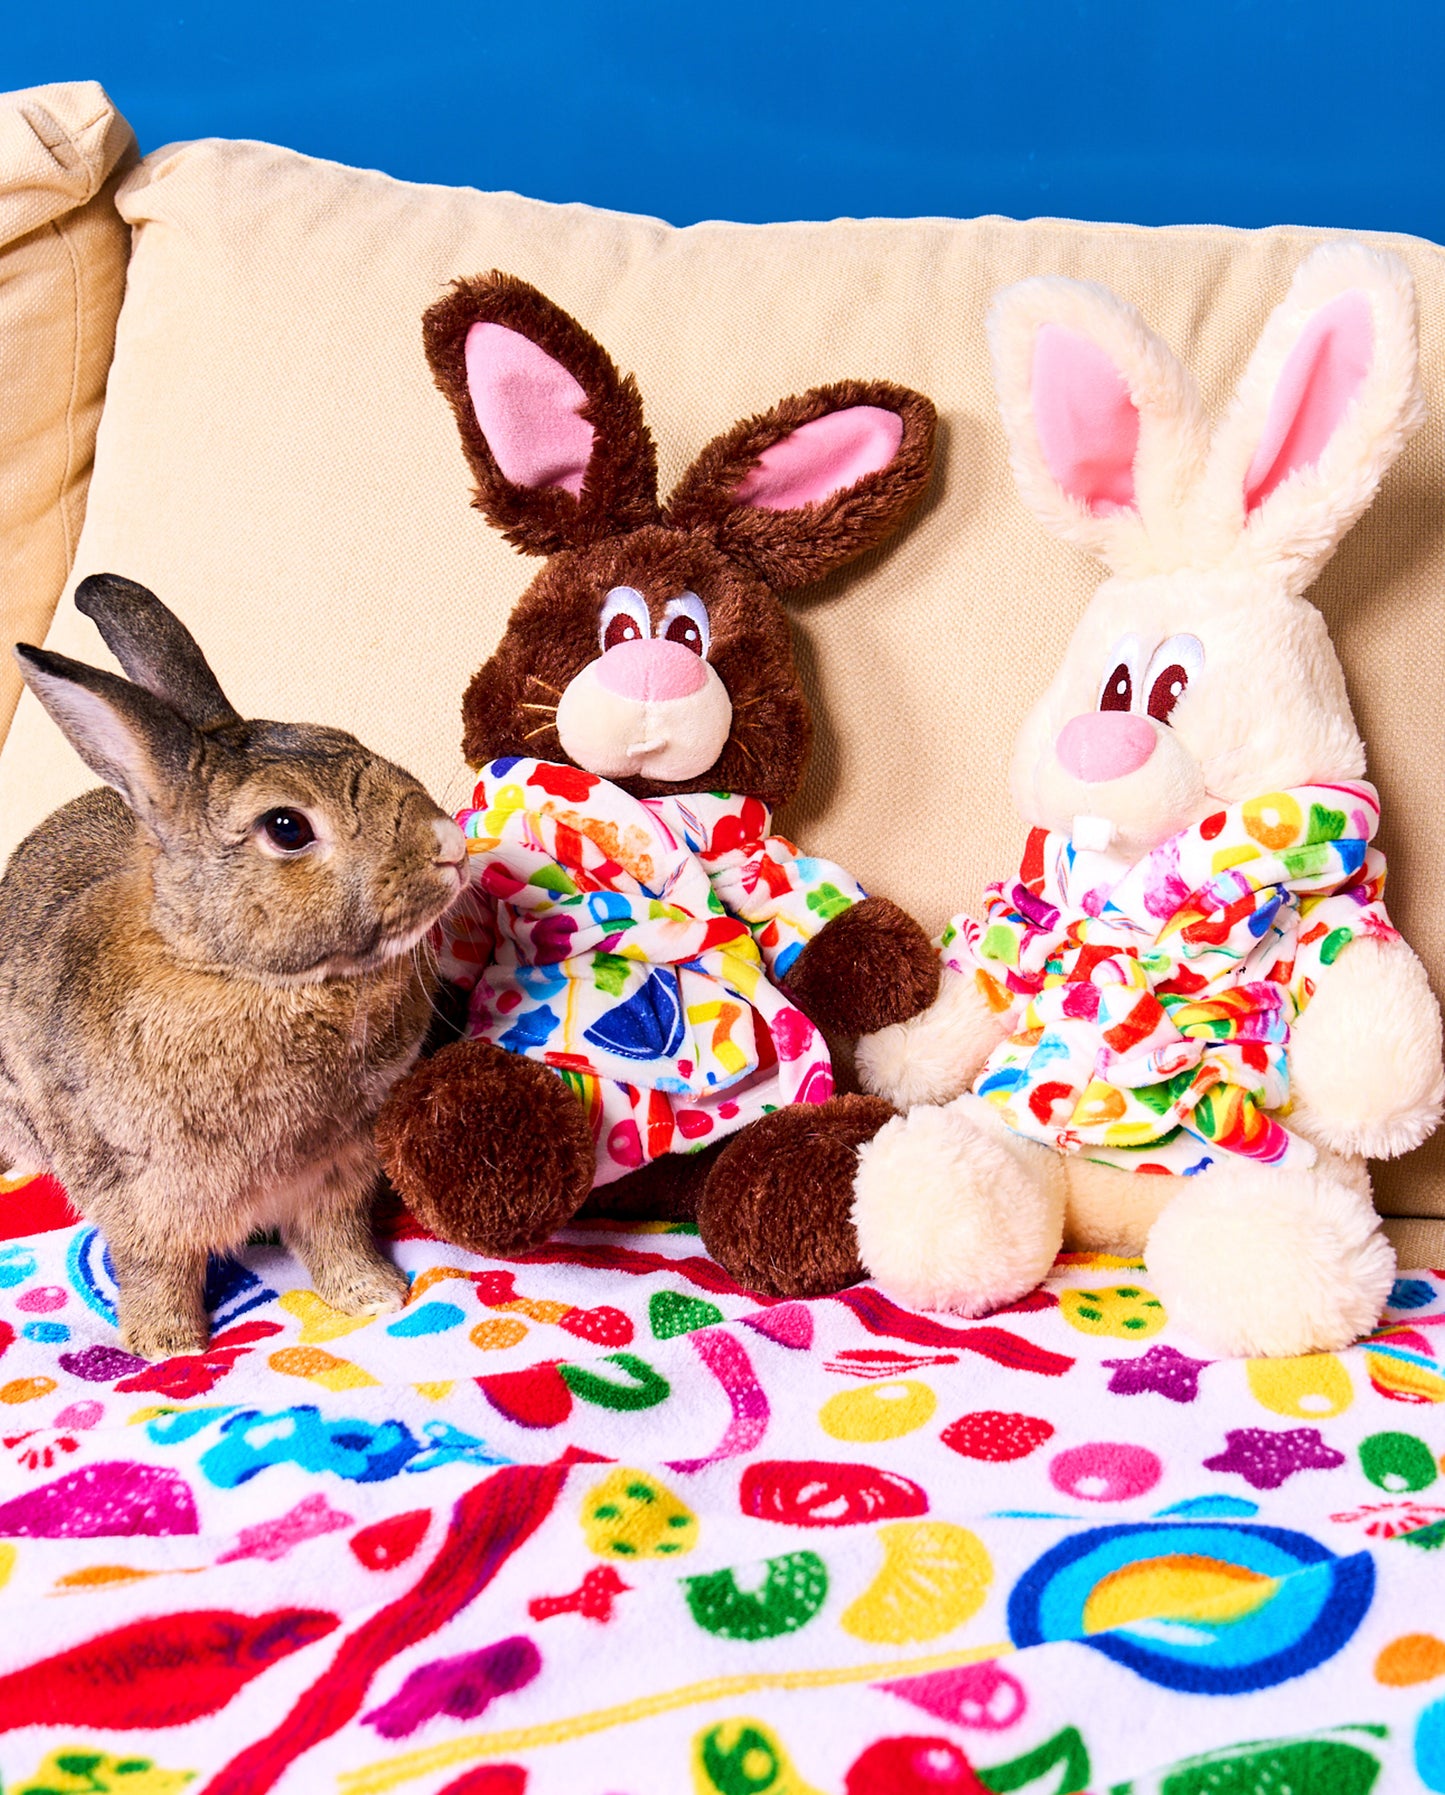 Living the Sweet Life: Chocolate the Bunny